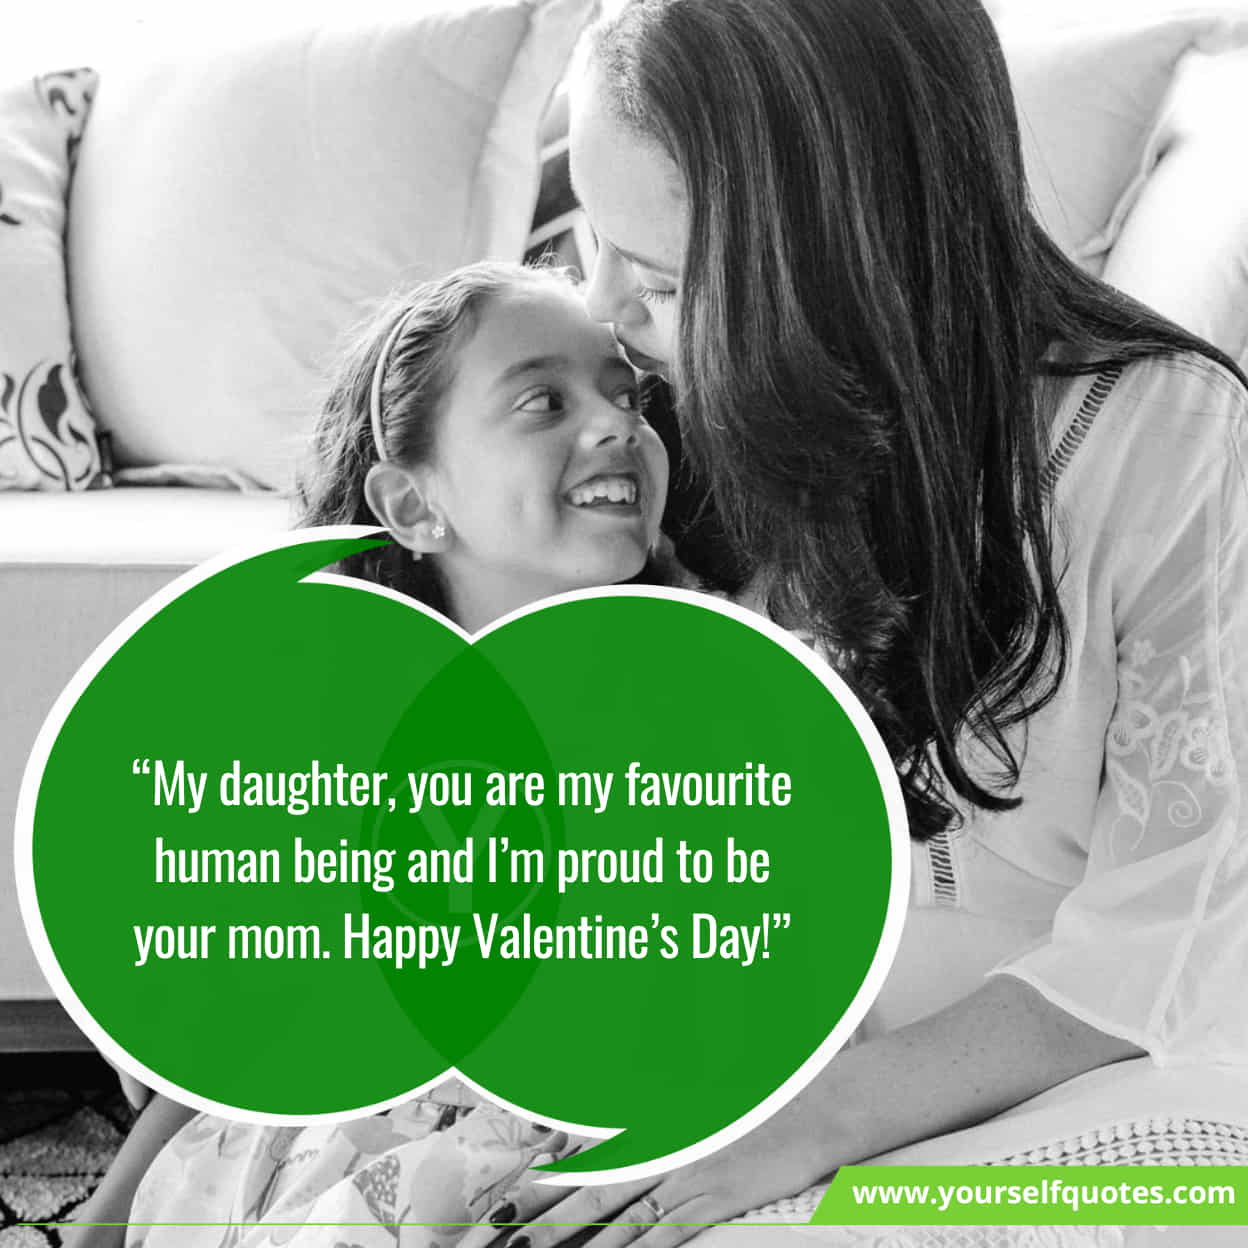 Sweet Valentine's Day Wishes for Daughter